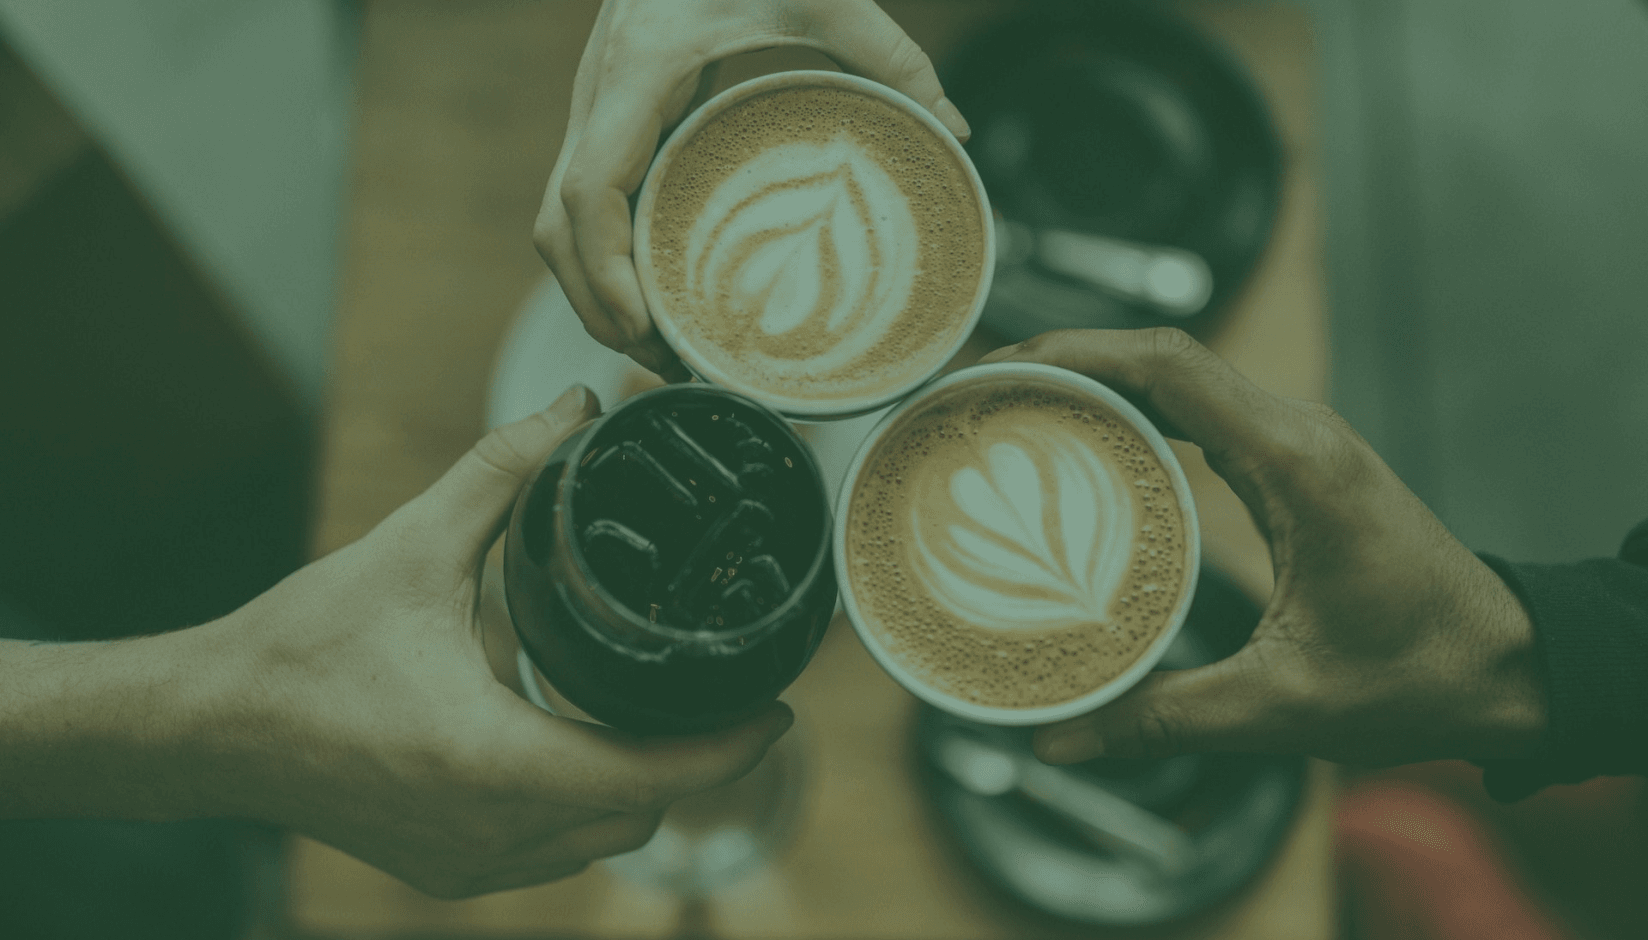 Good coffee to attract members to a coworking space